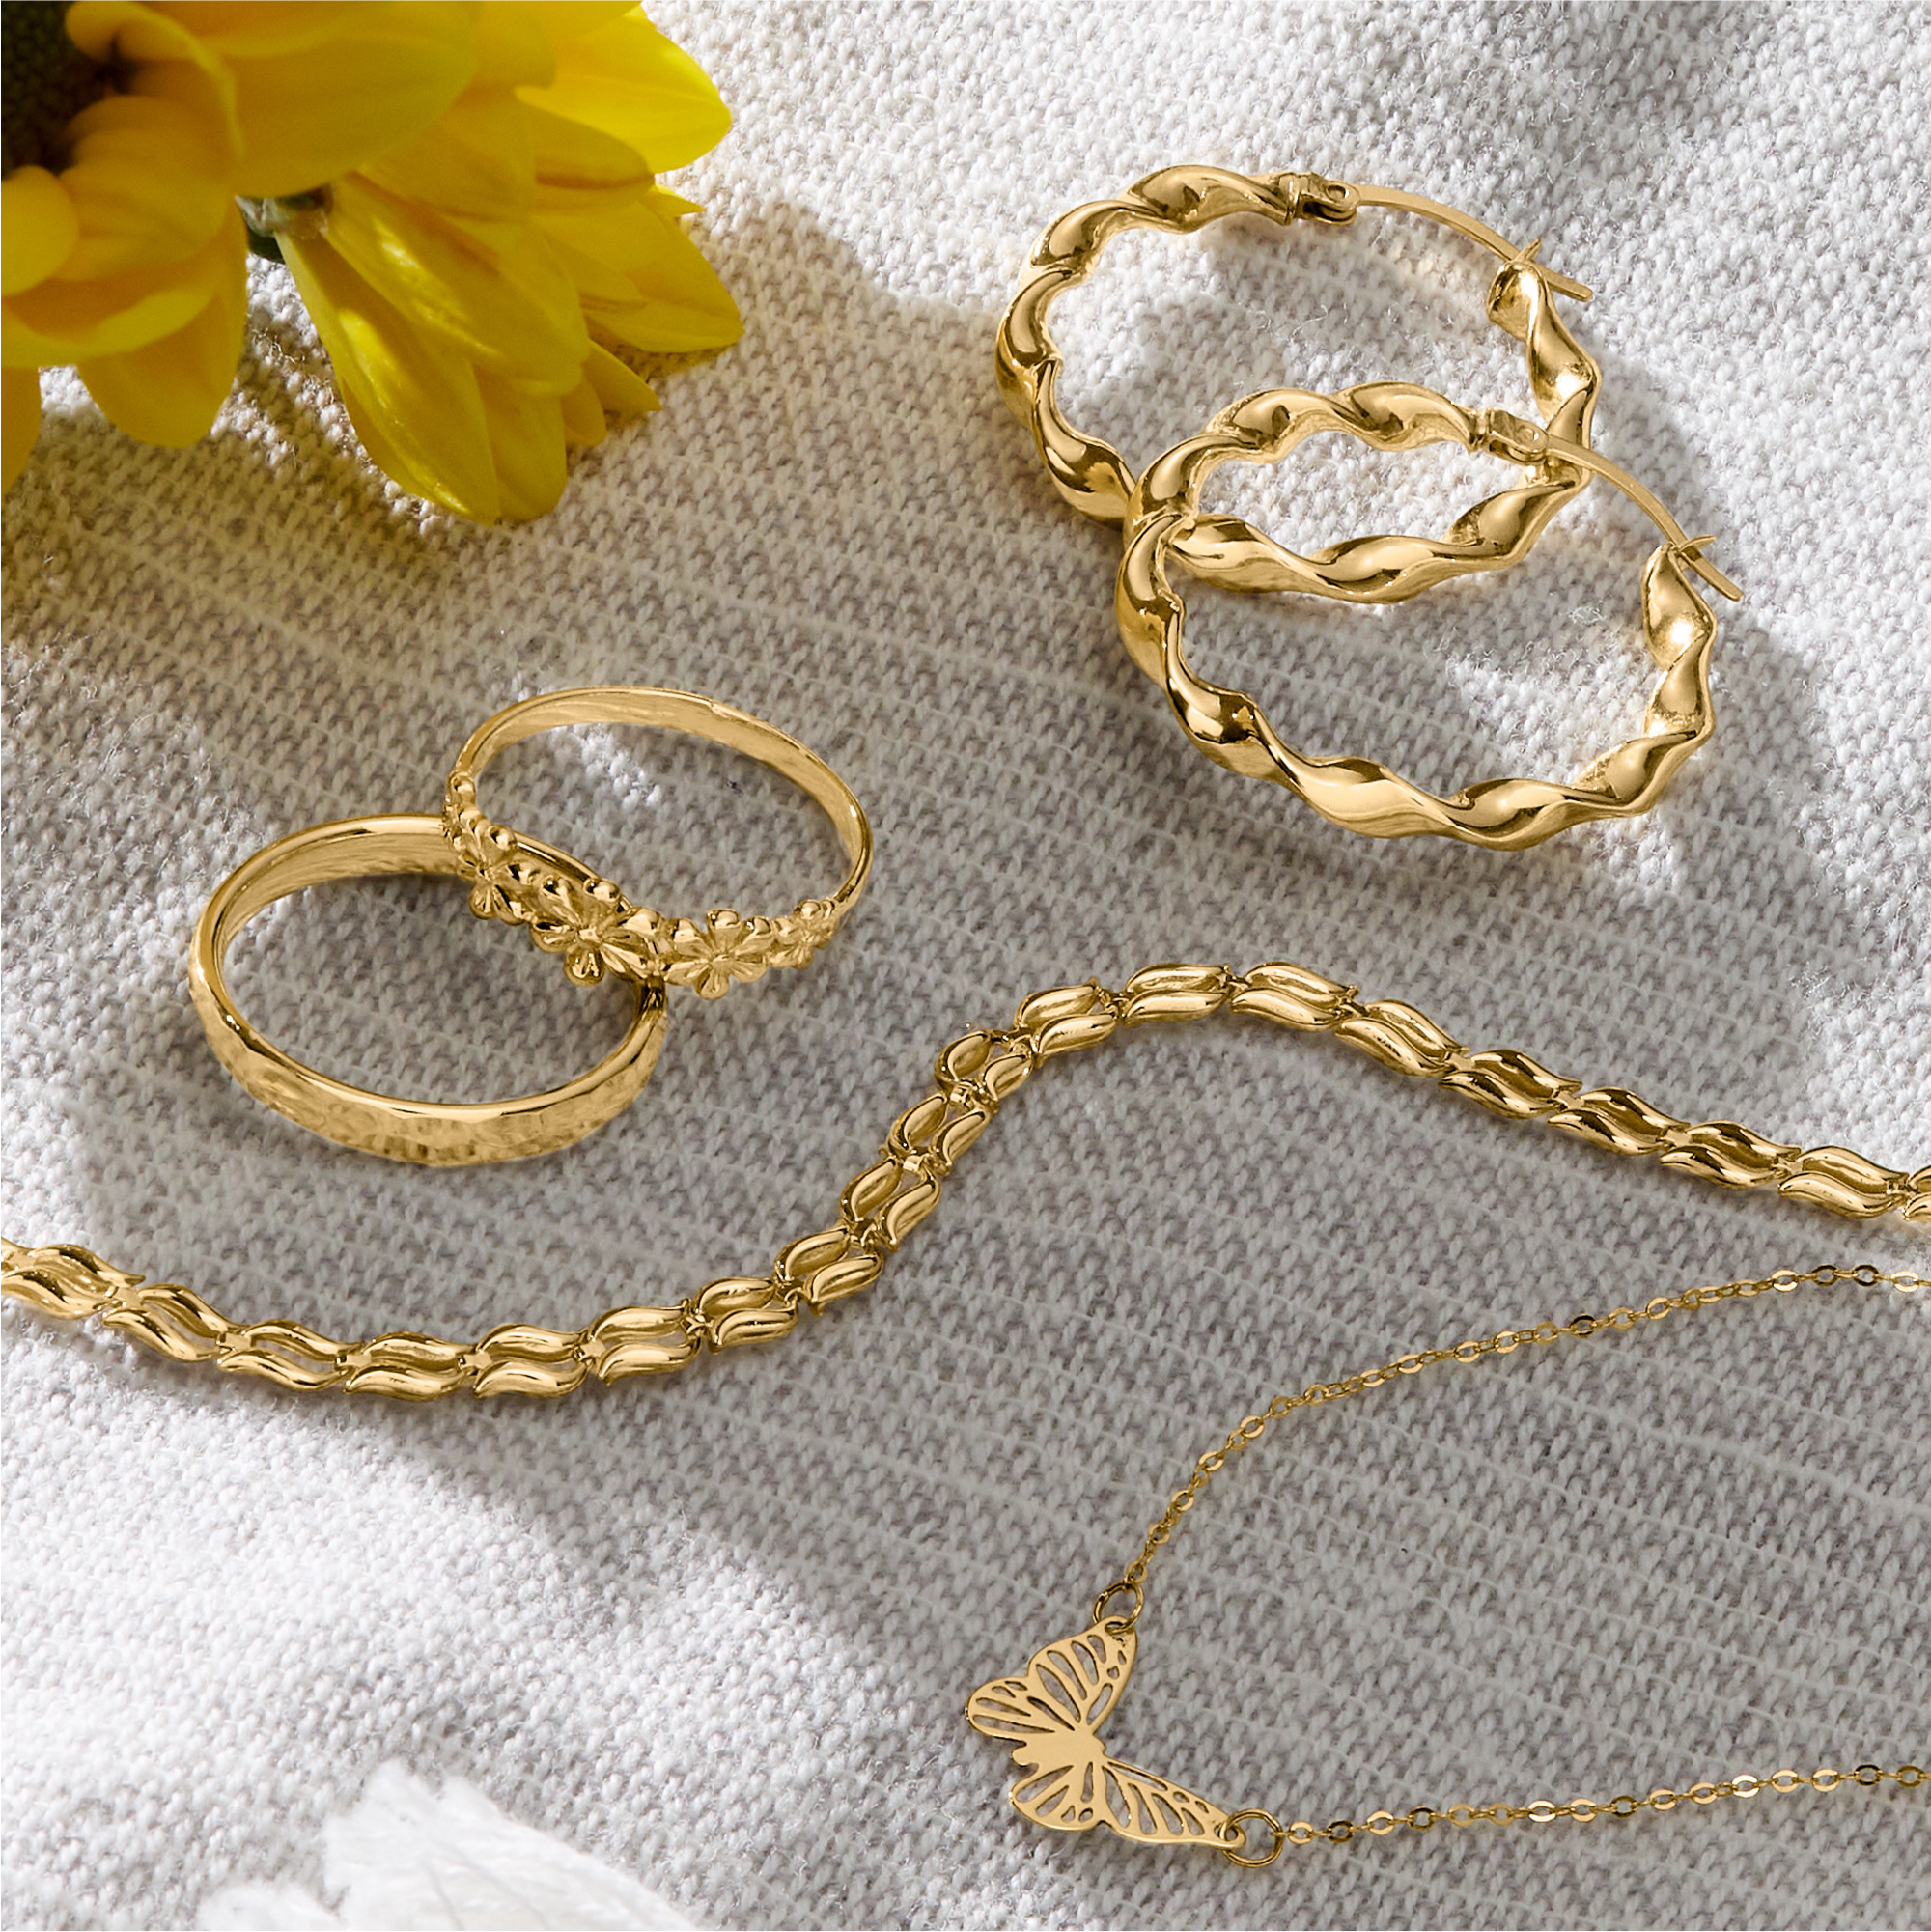 Image featuring a Canaria gold jewelry